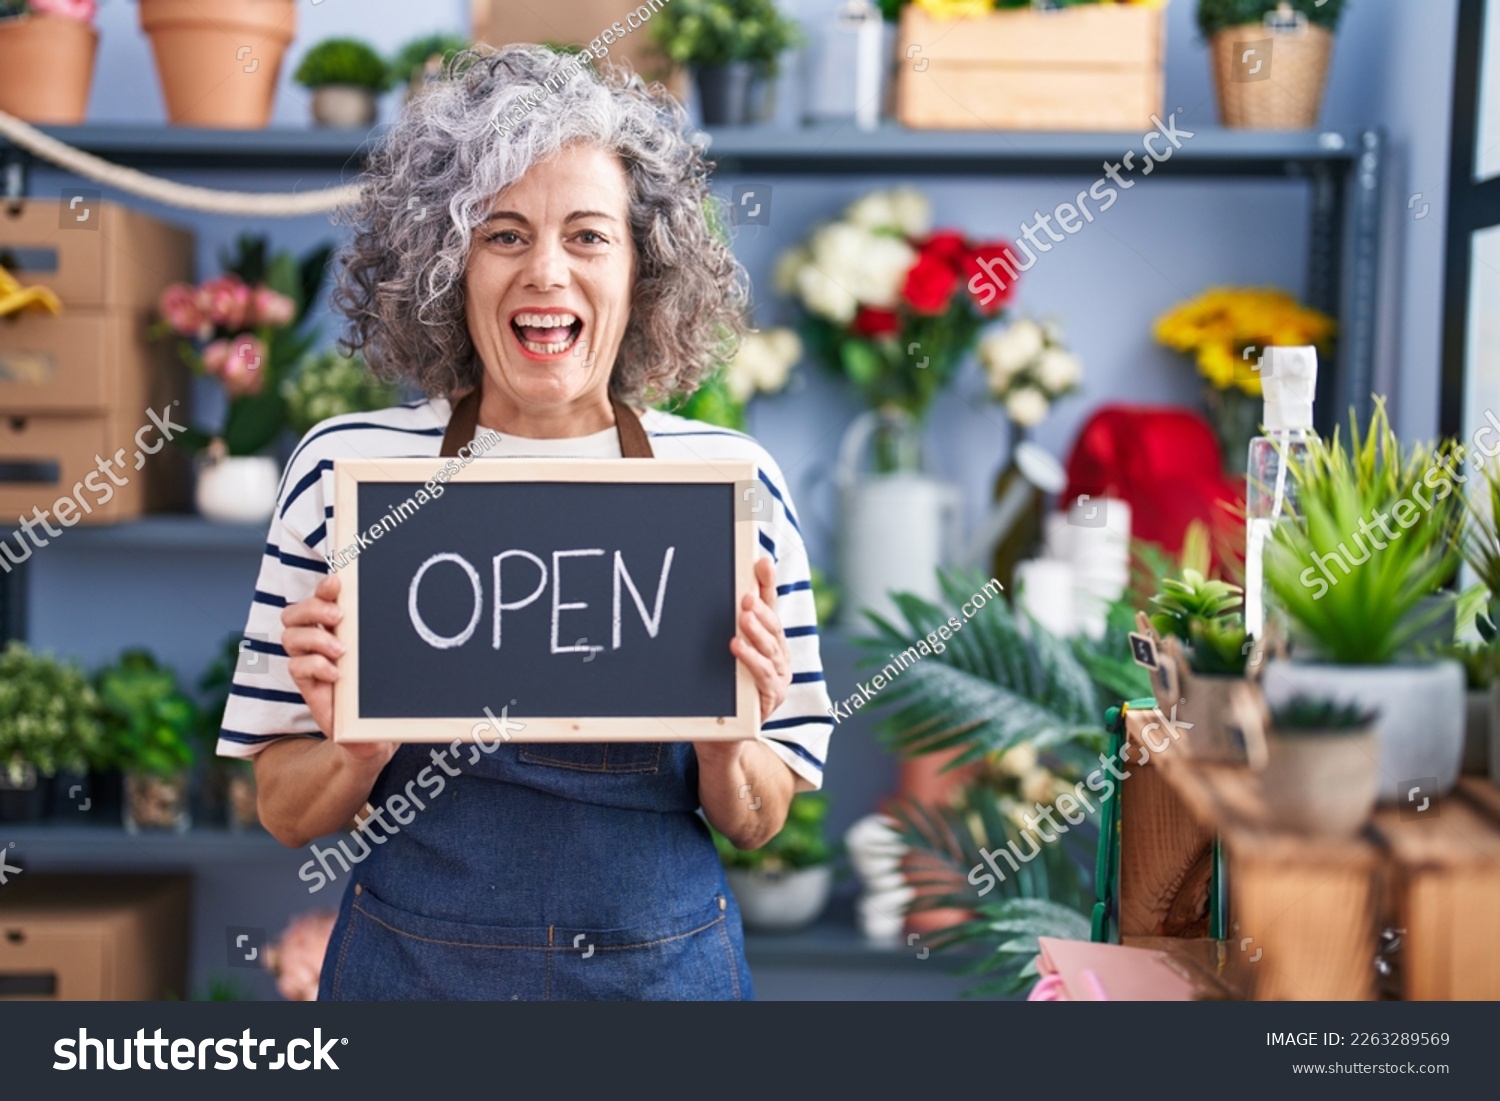 Middle age woman with grey hair working at florist with open sign smiling and laughing hard out loud because funny crazy joke.  #2263289569